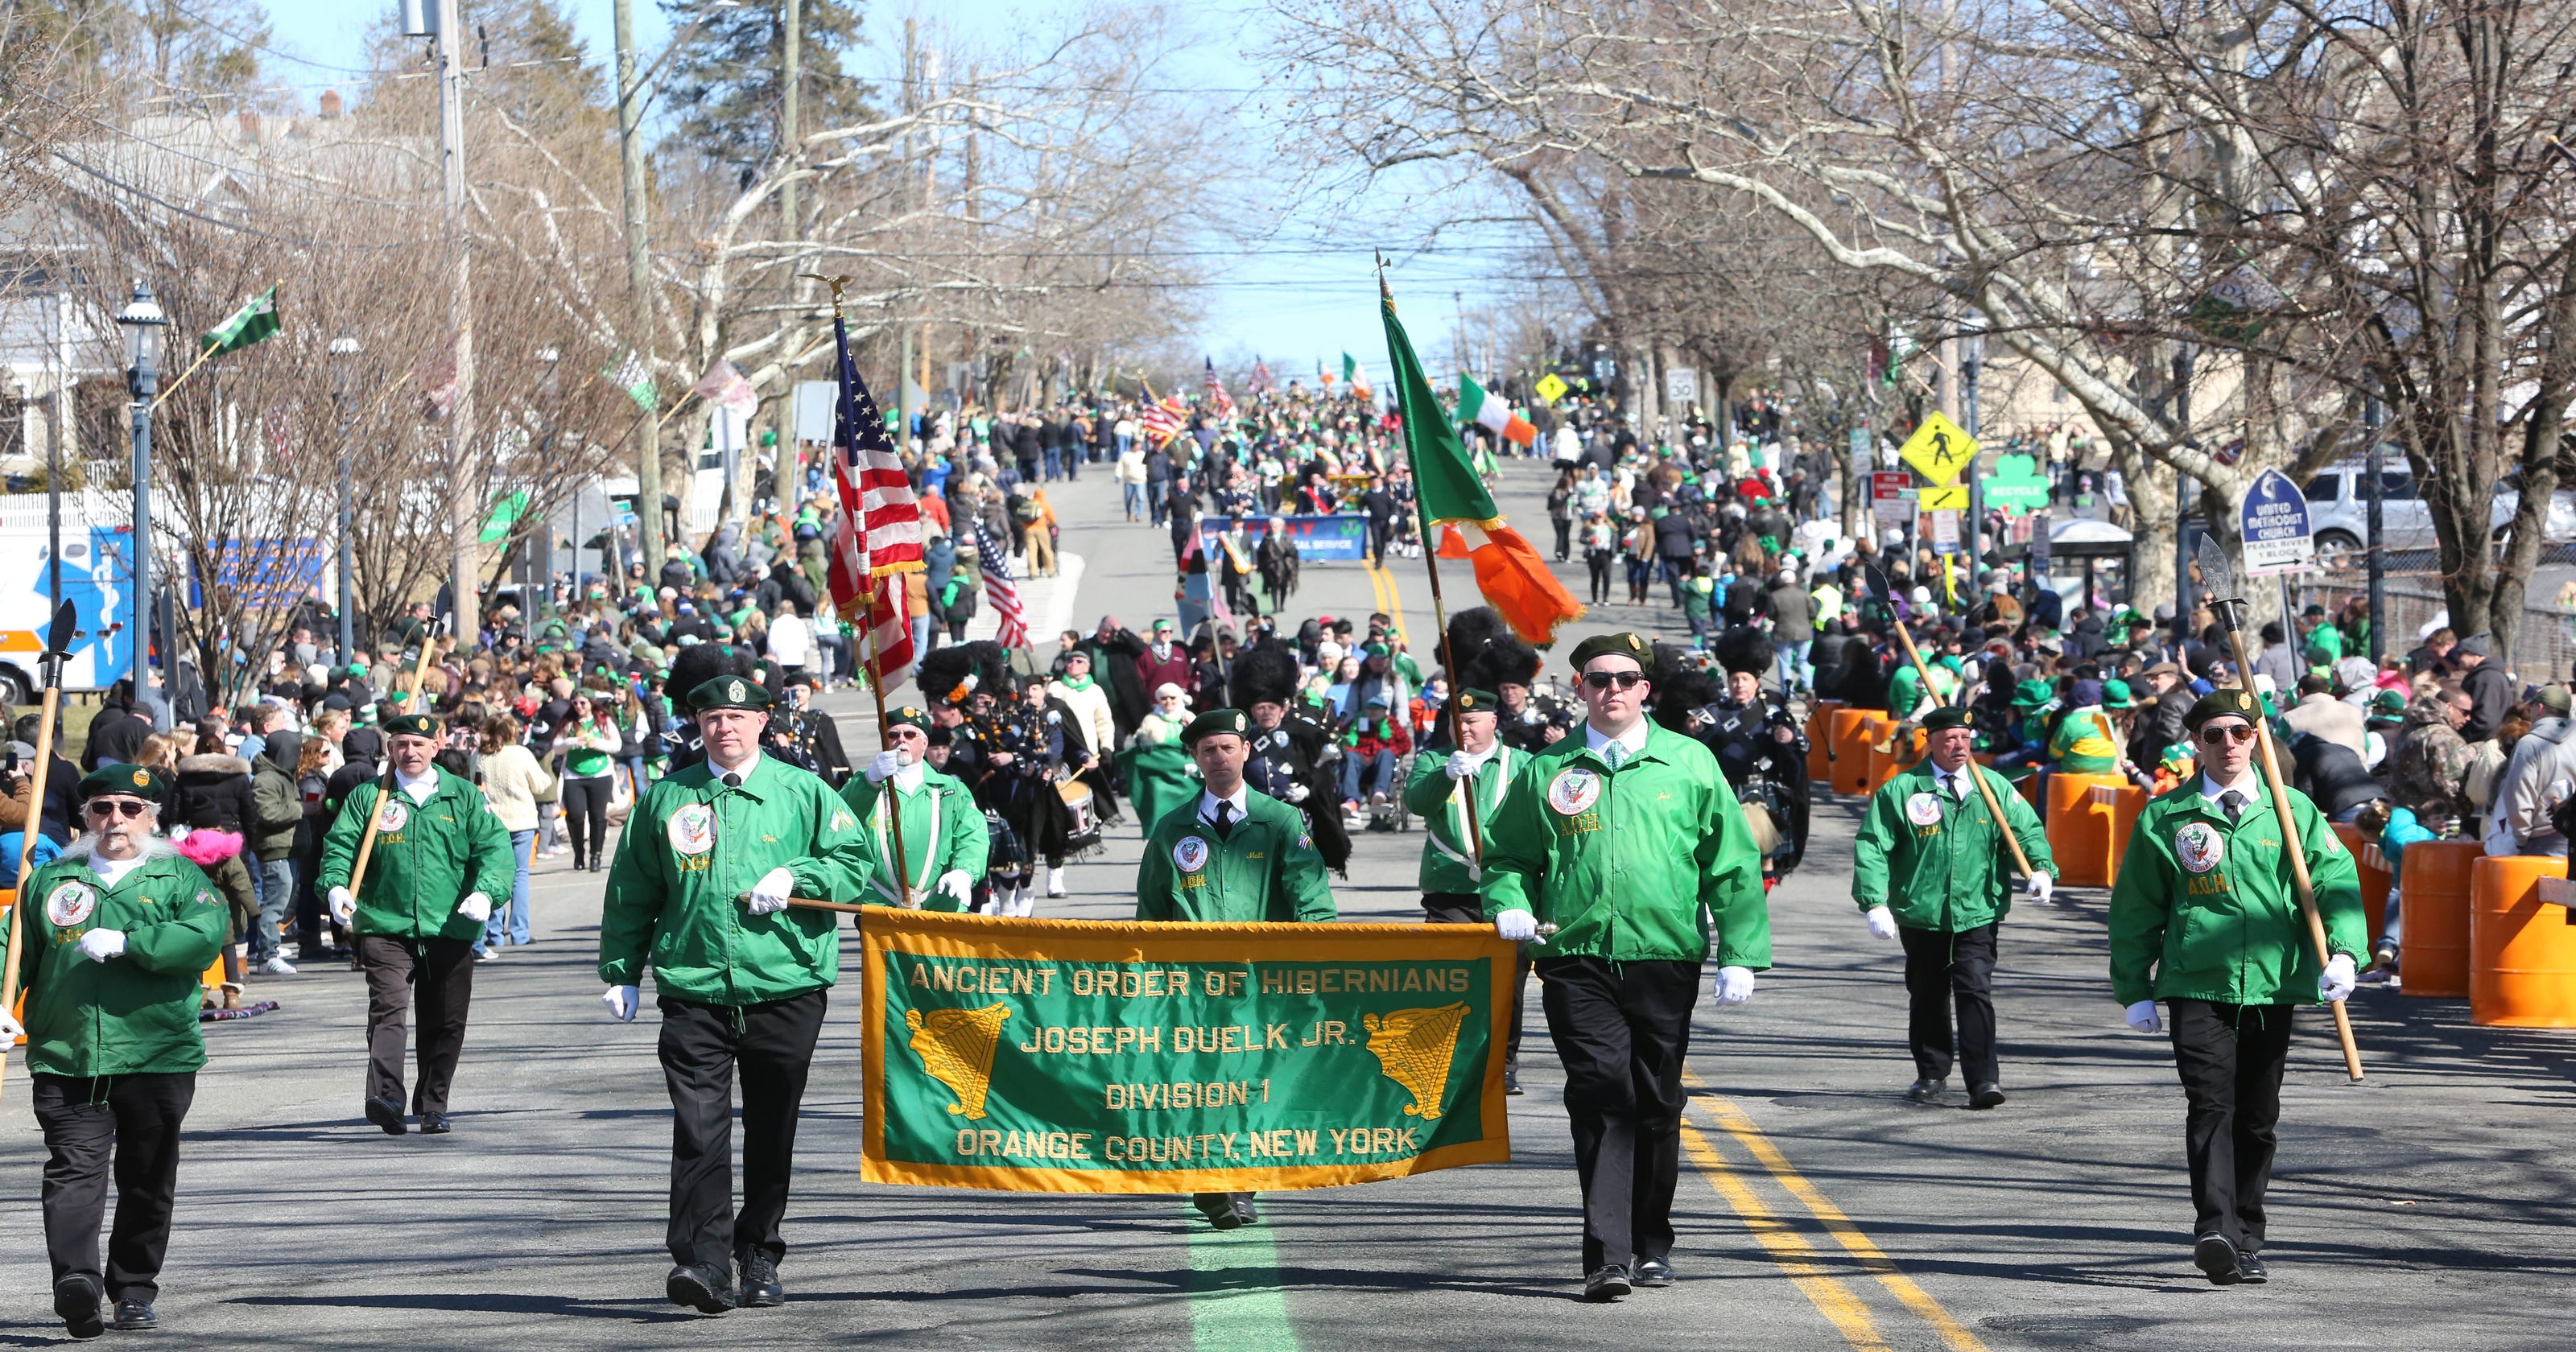 Weekend St. Patrick's Day parade forecast